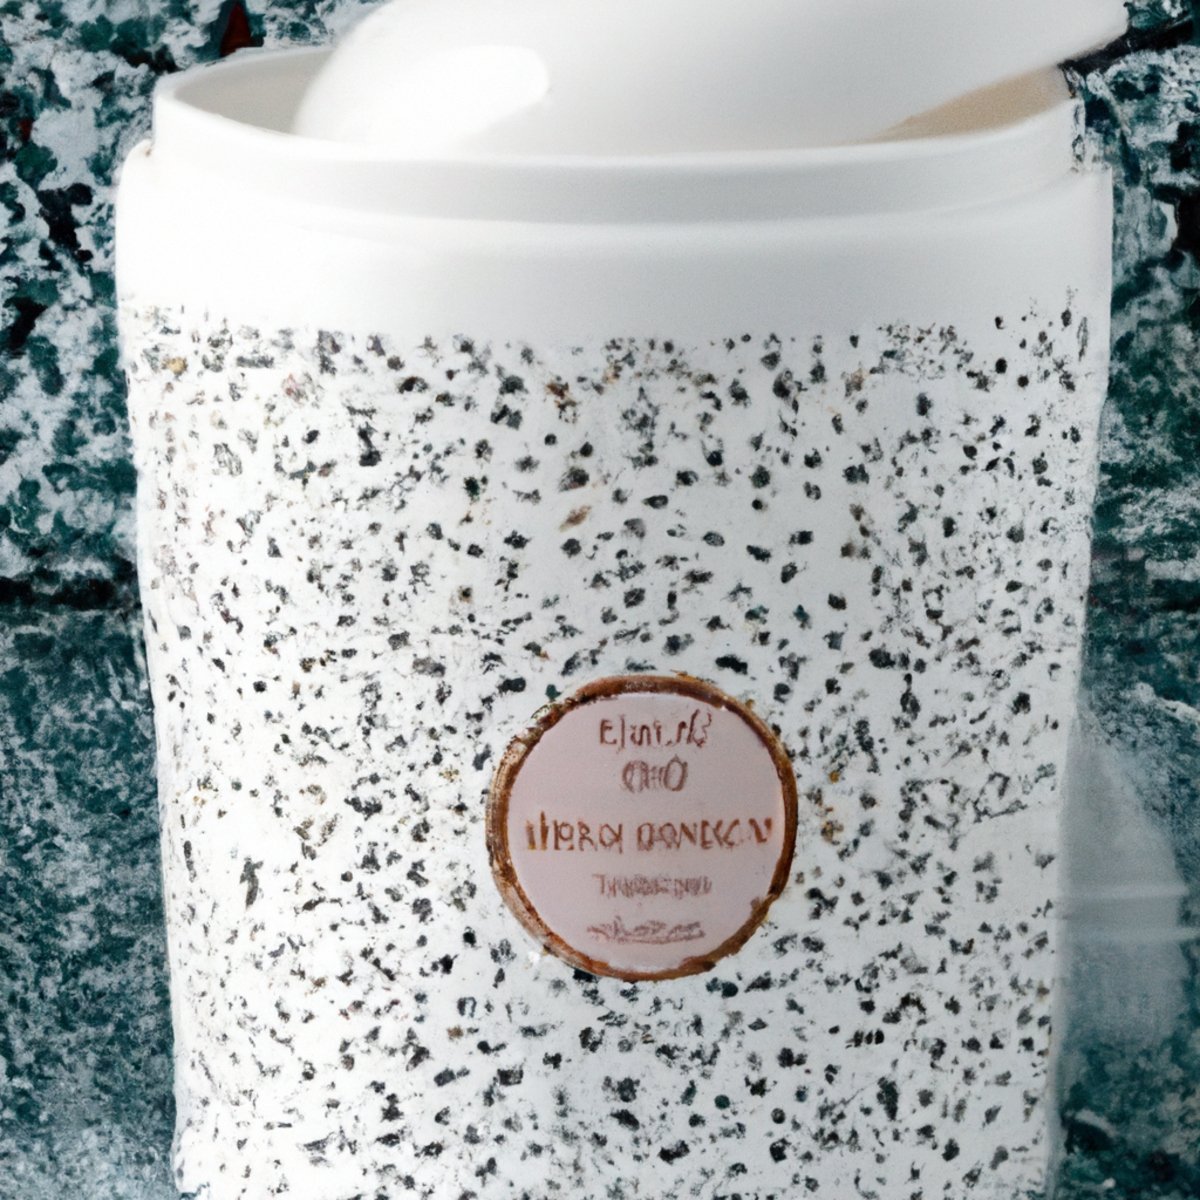 Inner beauty - Porcelain jar with floral patterns, open to reveal creamy face mask. Flowers add elegance. Soft lighting emphasizes radiant complexion.